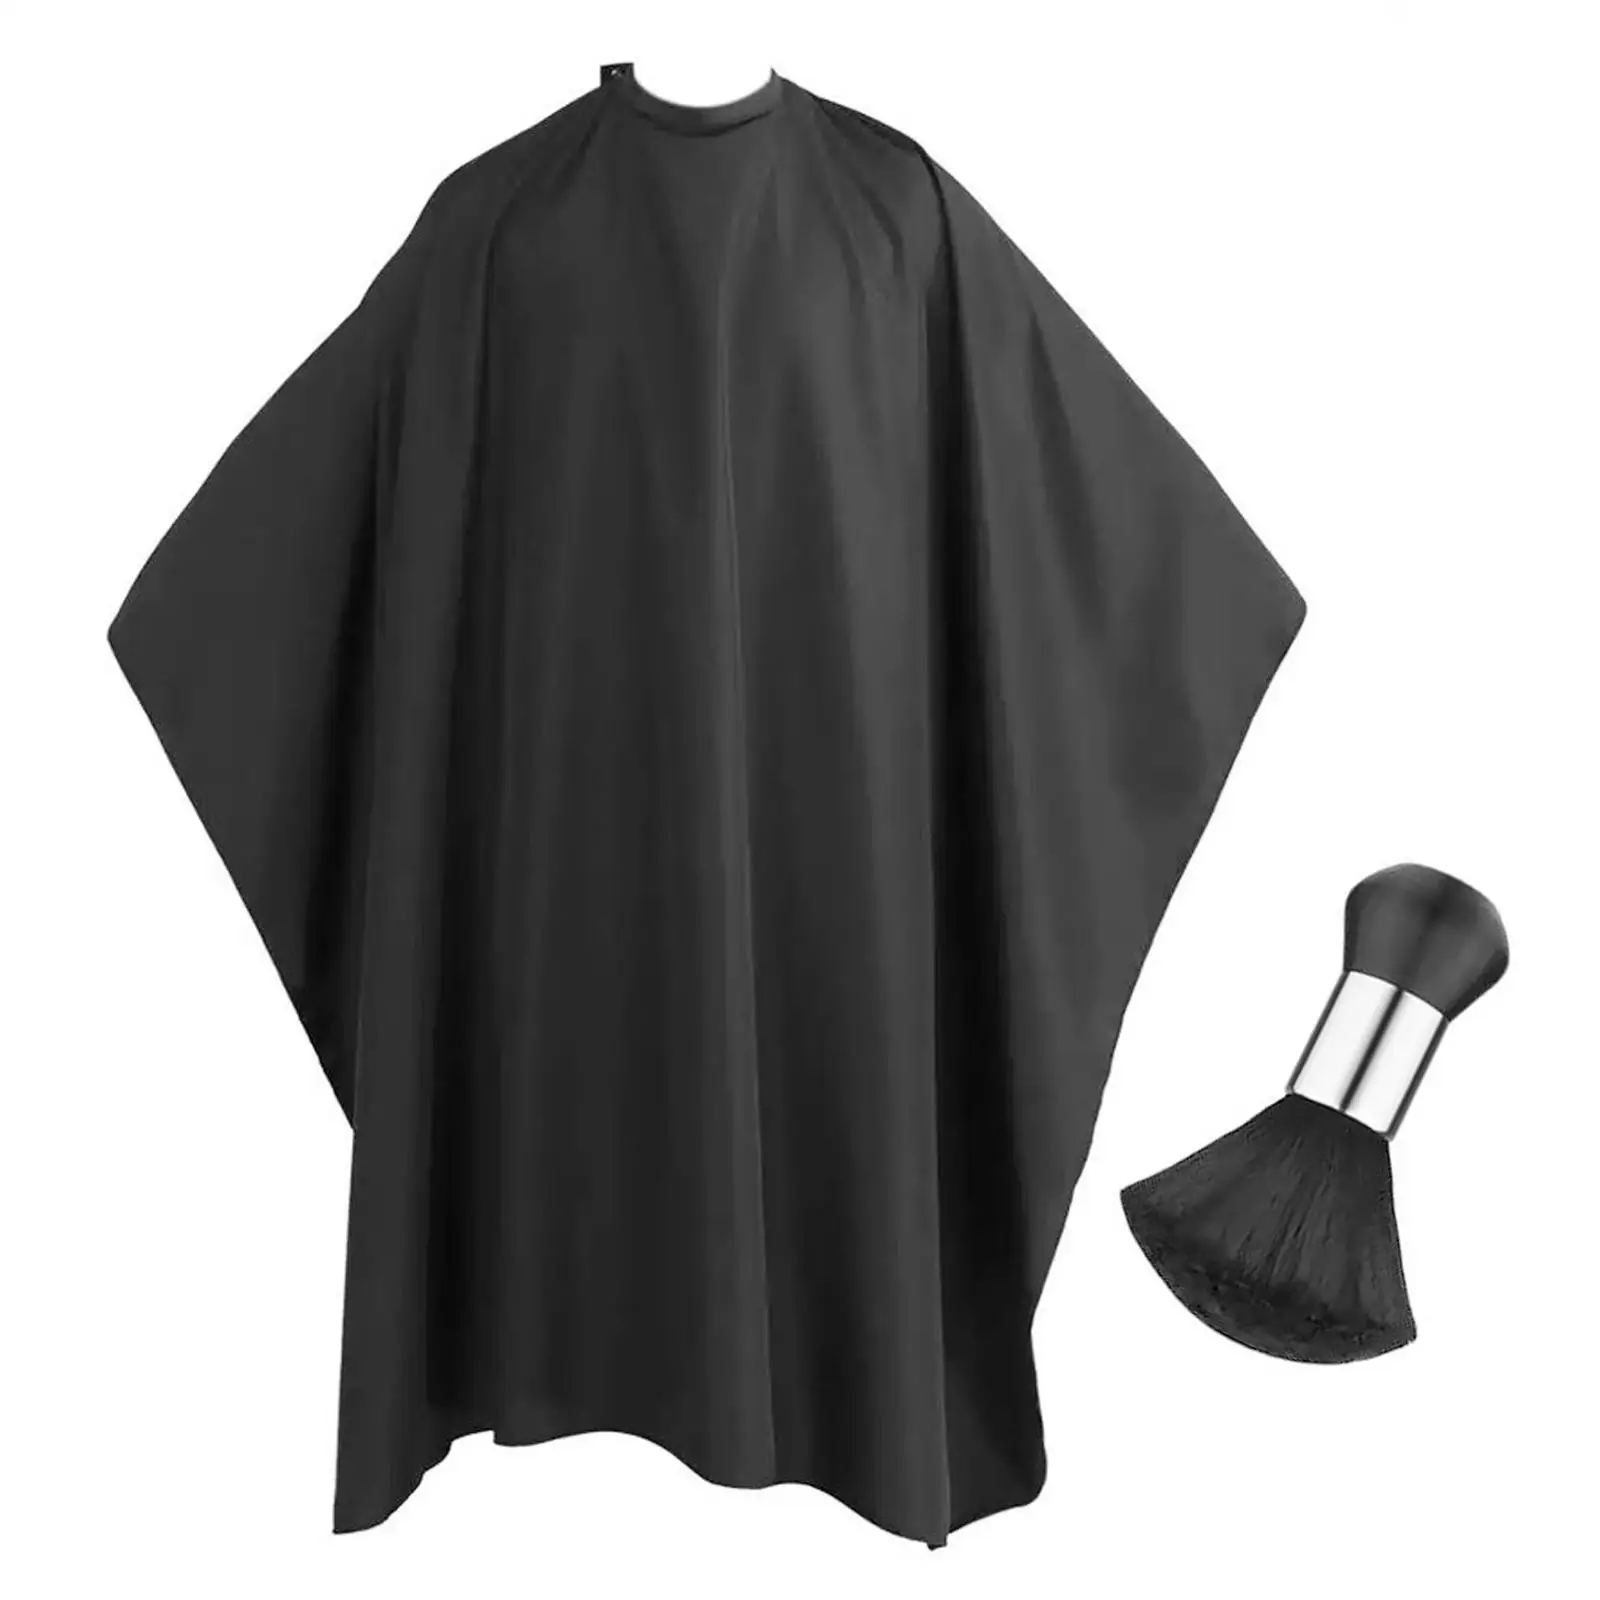 Hairdresser Cape Black Waterproof for Men Women and Kids Hairstylists Salon Haircut